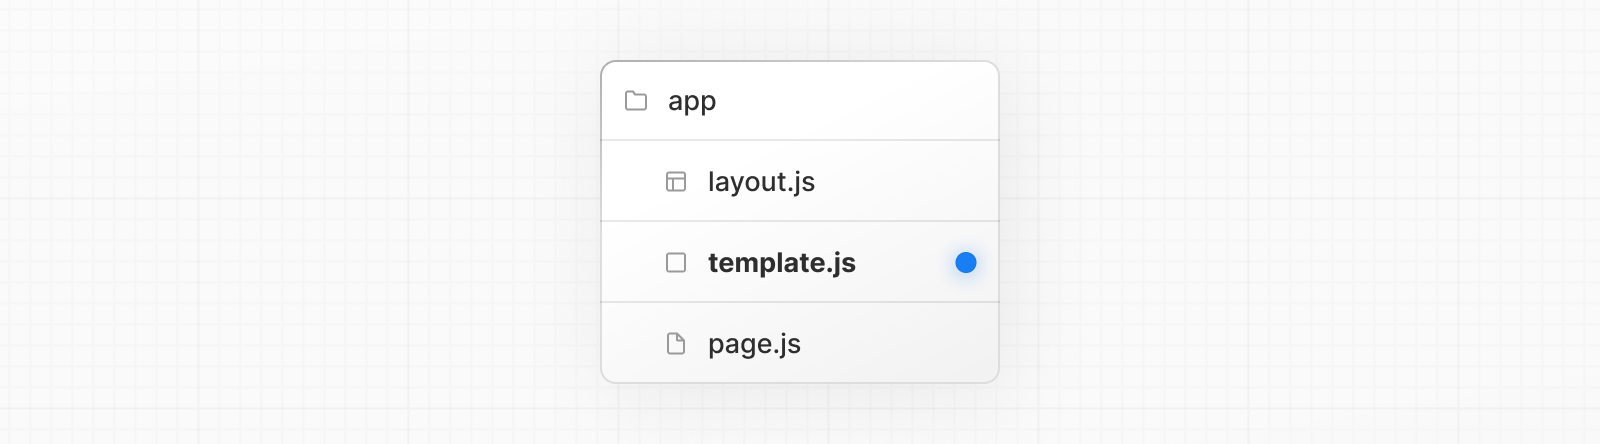 template.js special file